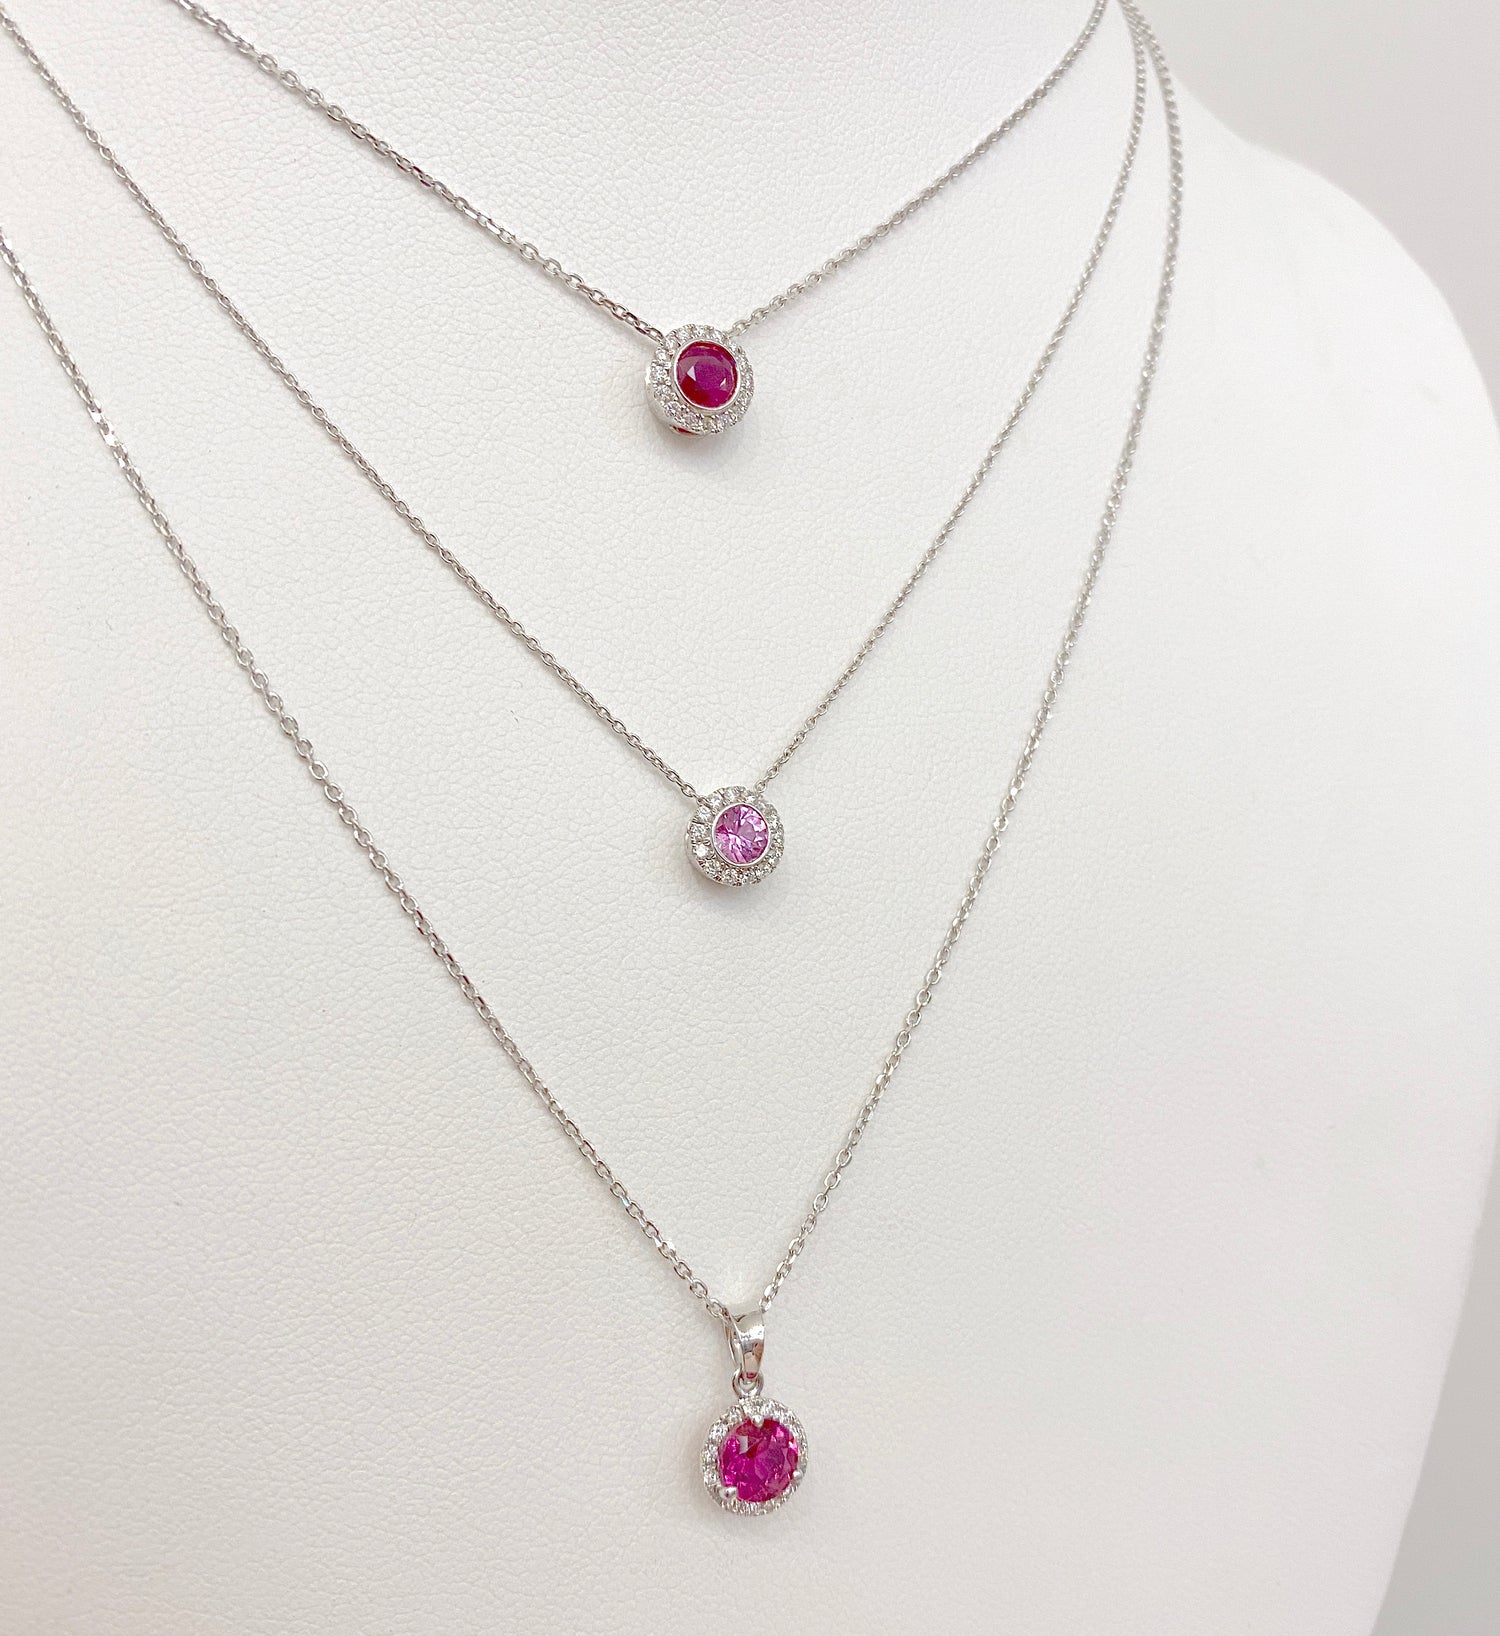 0.79 ctw Pink Sapphire and Diamond Pendant in 14K White Gold